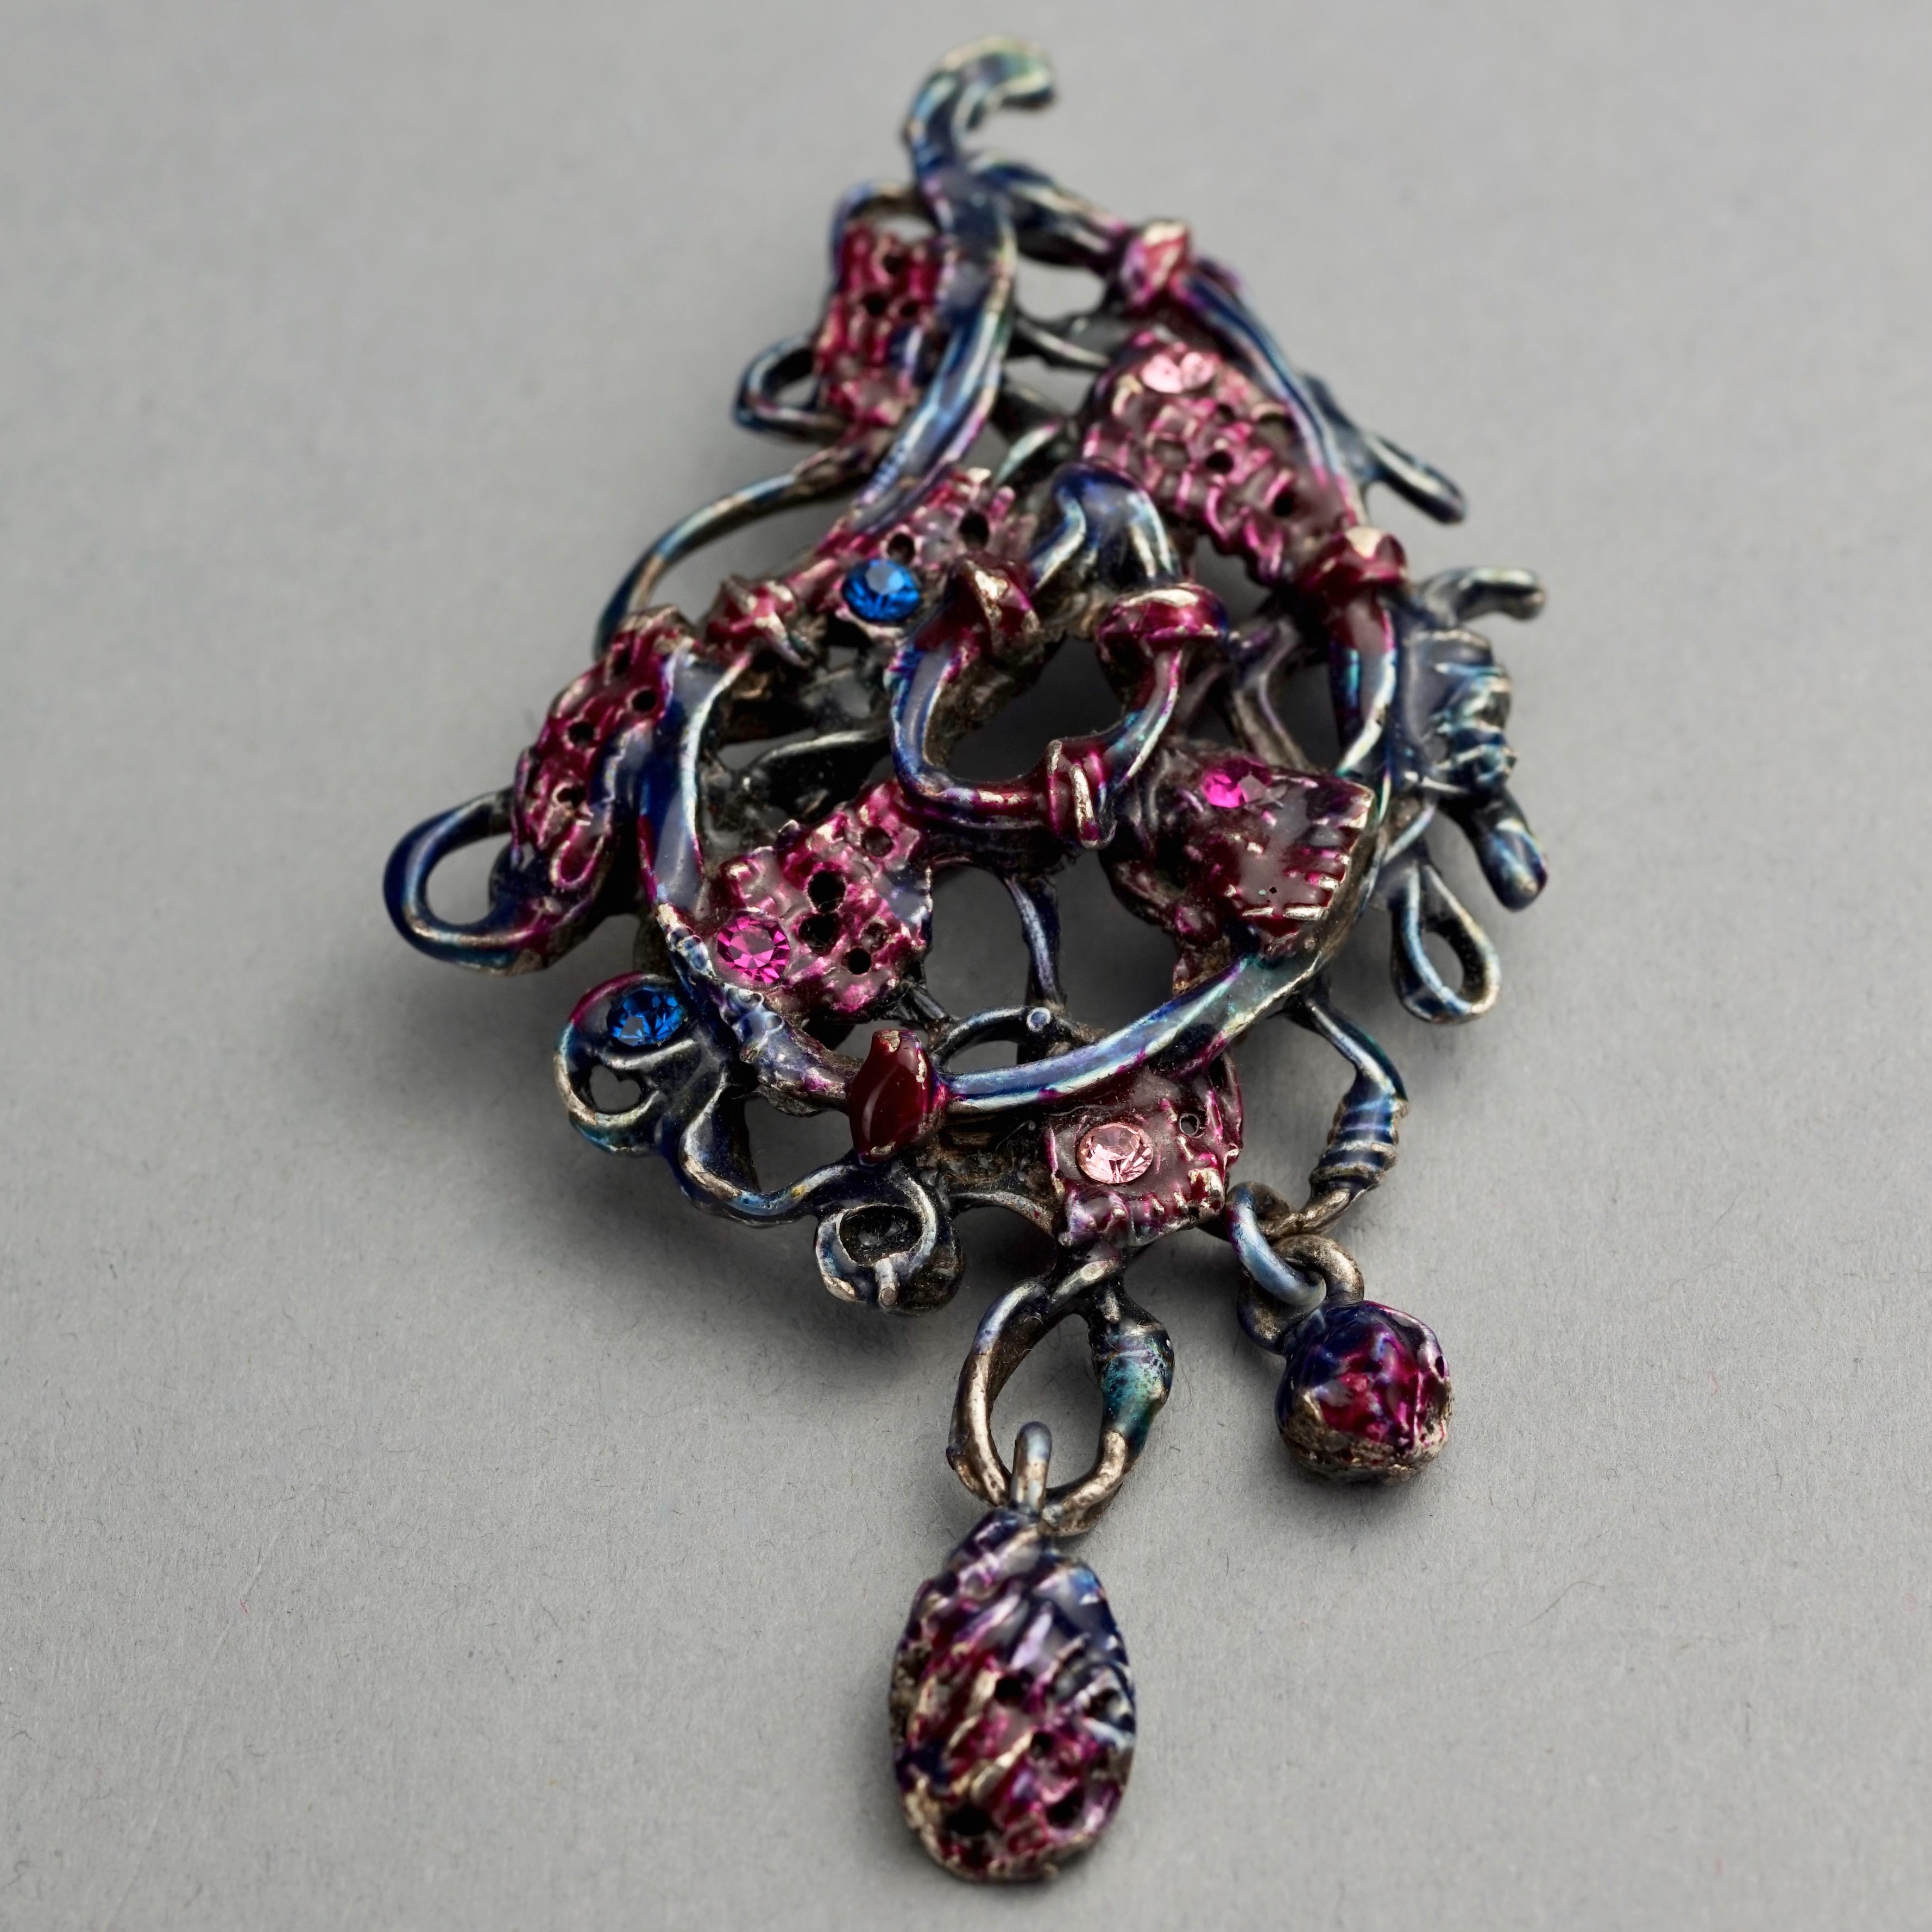 Vintage CHRISTIAN LACROIX Intricate Paisley Rhinestones Rhinestone Brooch In Excellent Condition For Sale In Kingersheim, Alsace